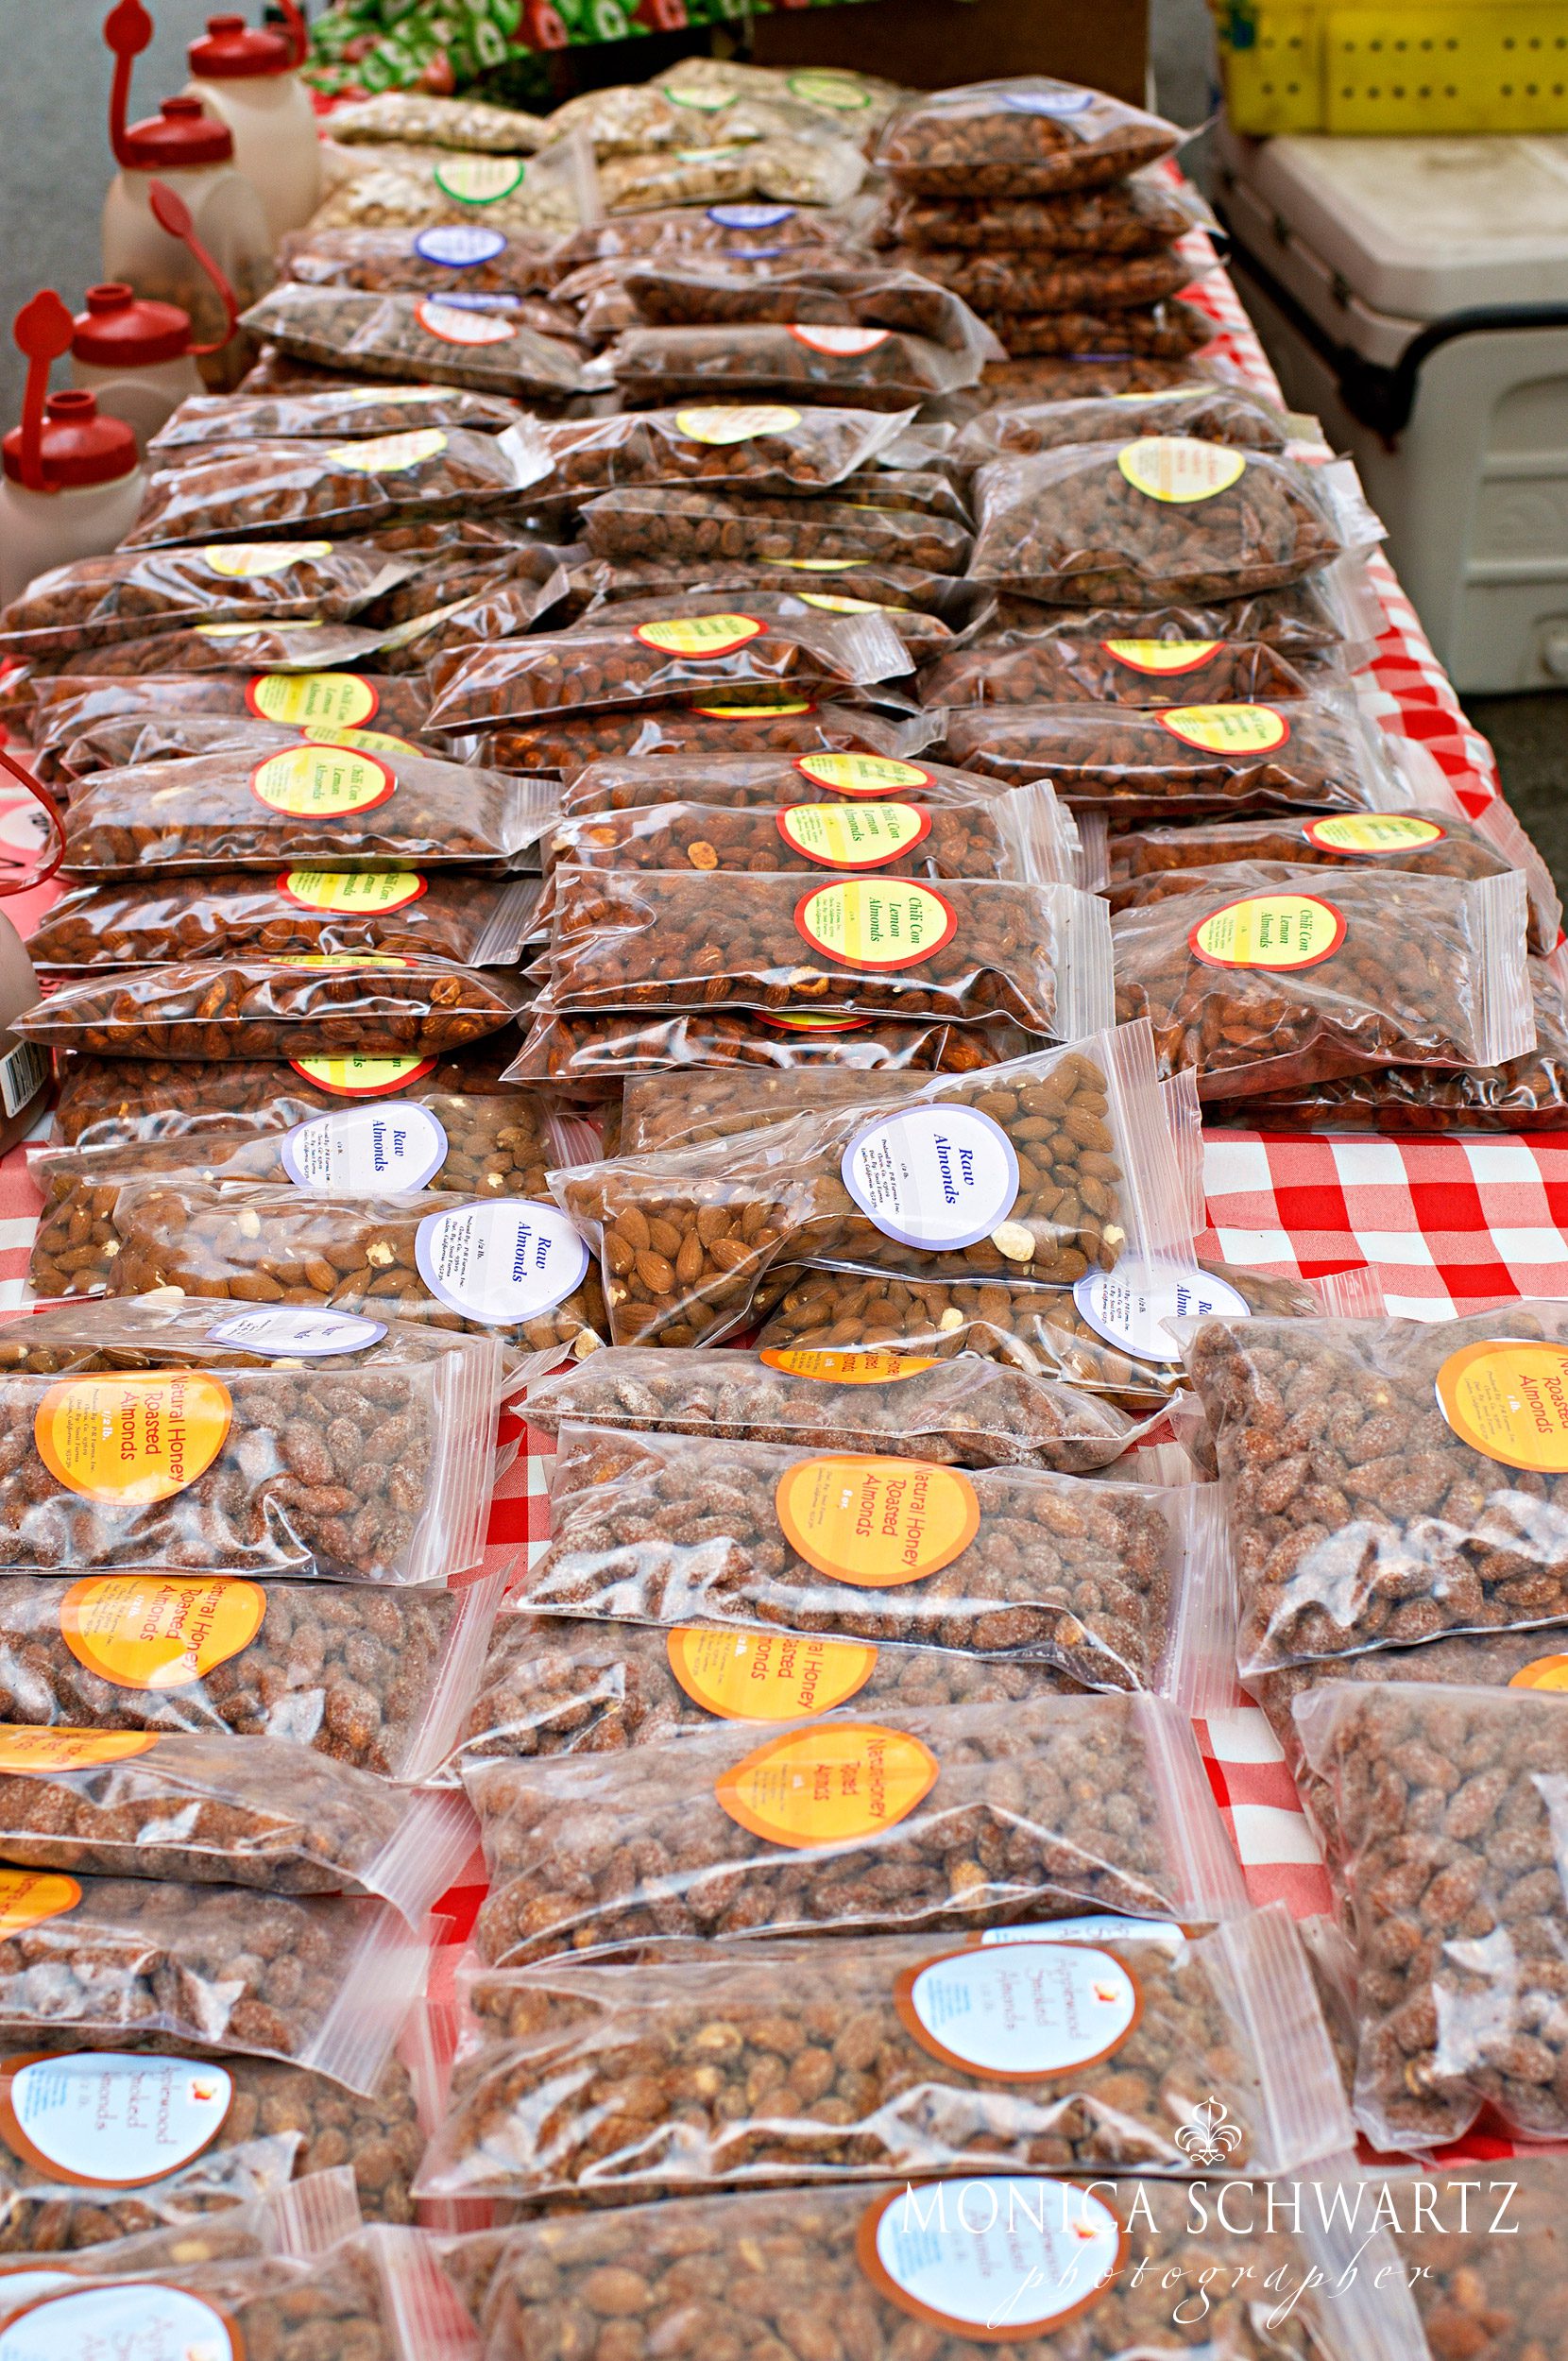 Almonds-at-the-farmers-market-in-Carmel-by-the-Sea-California